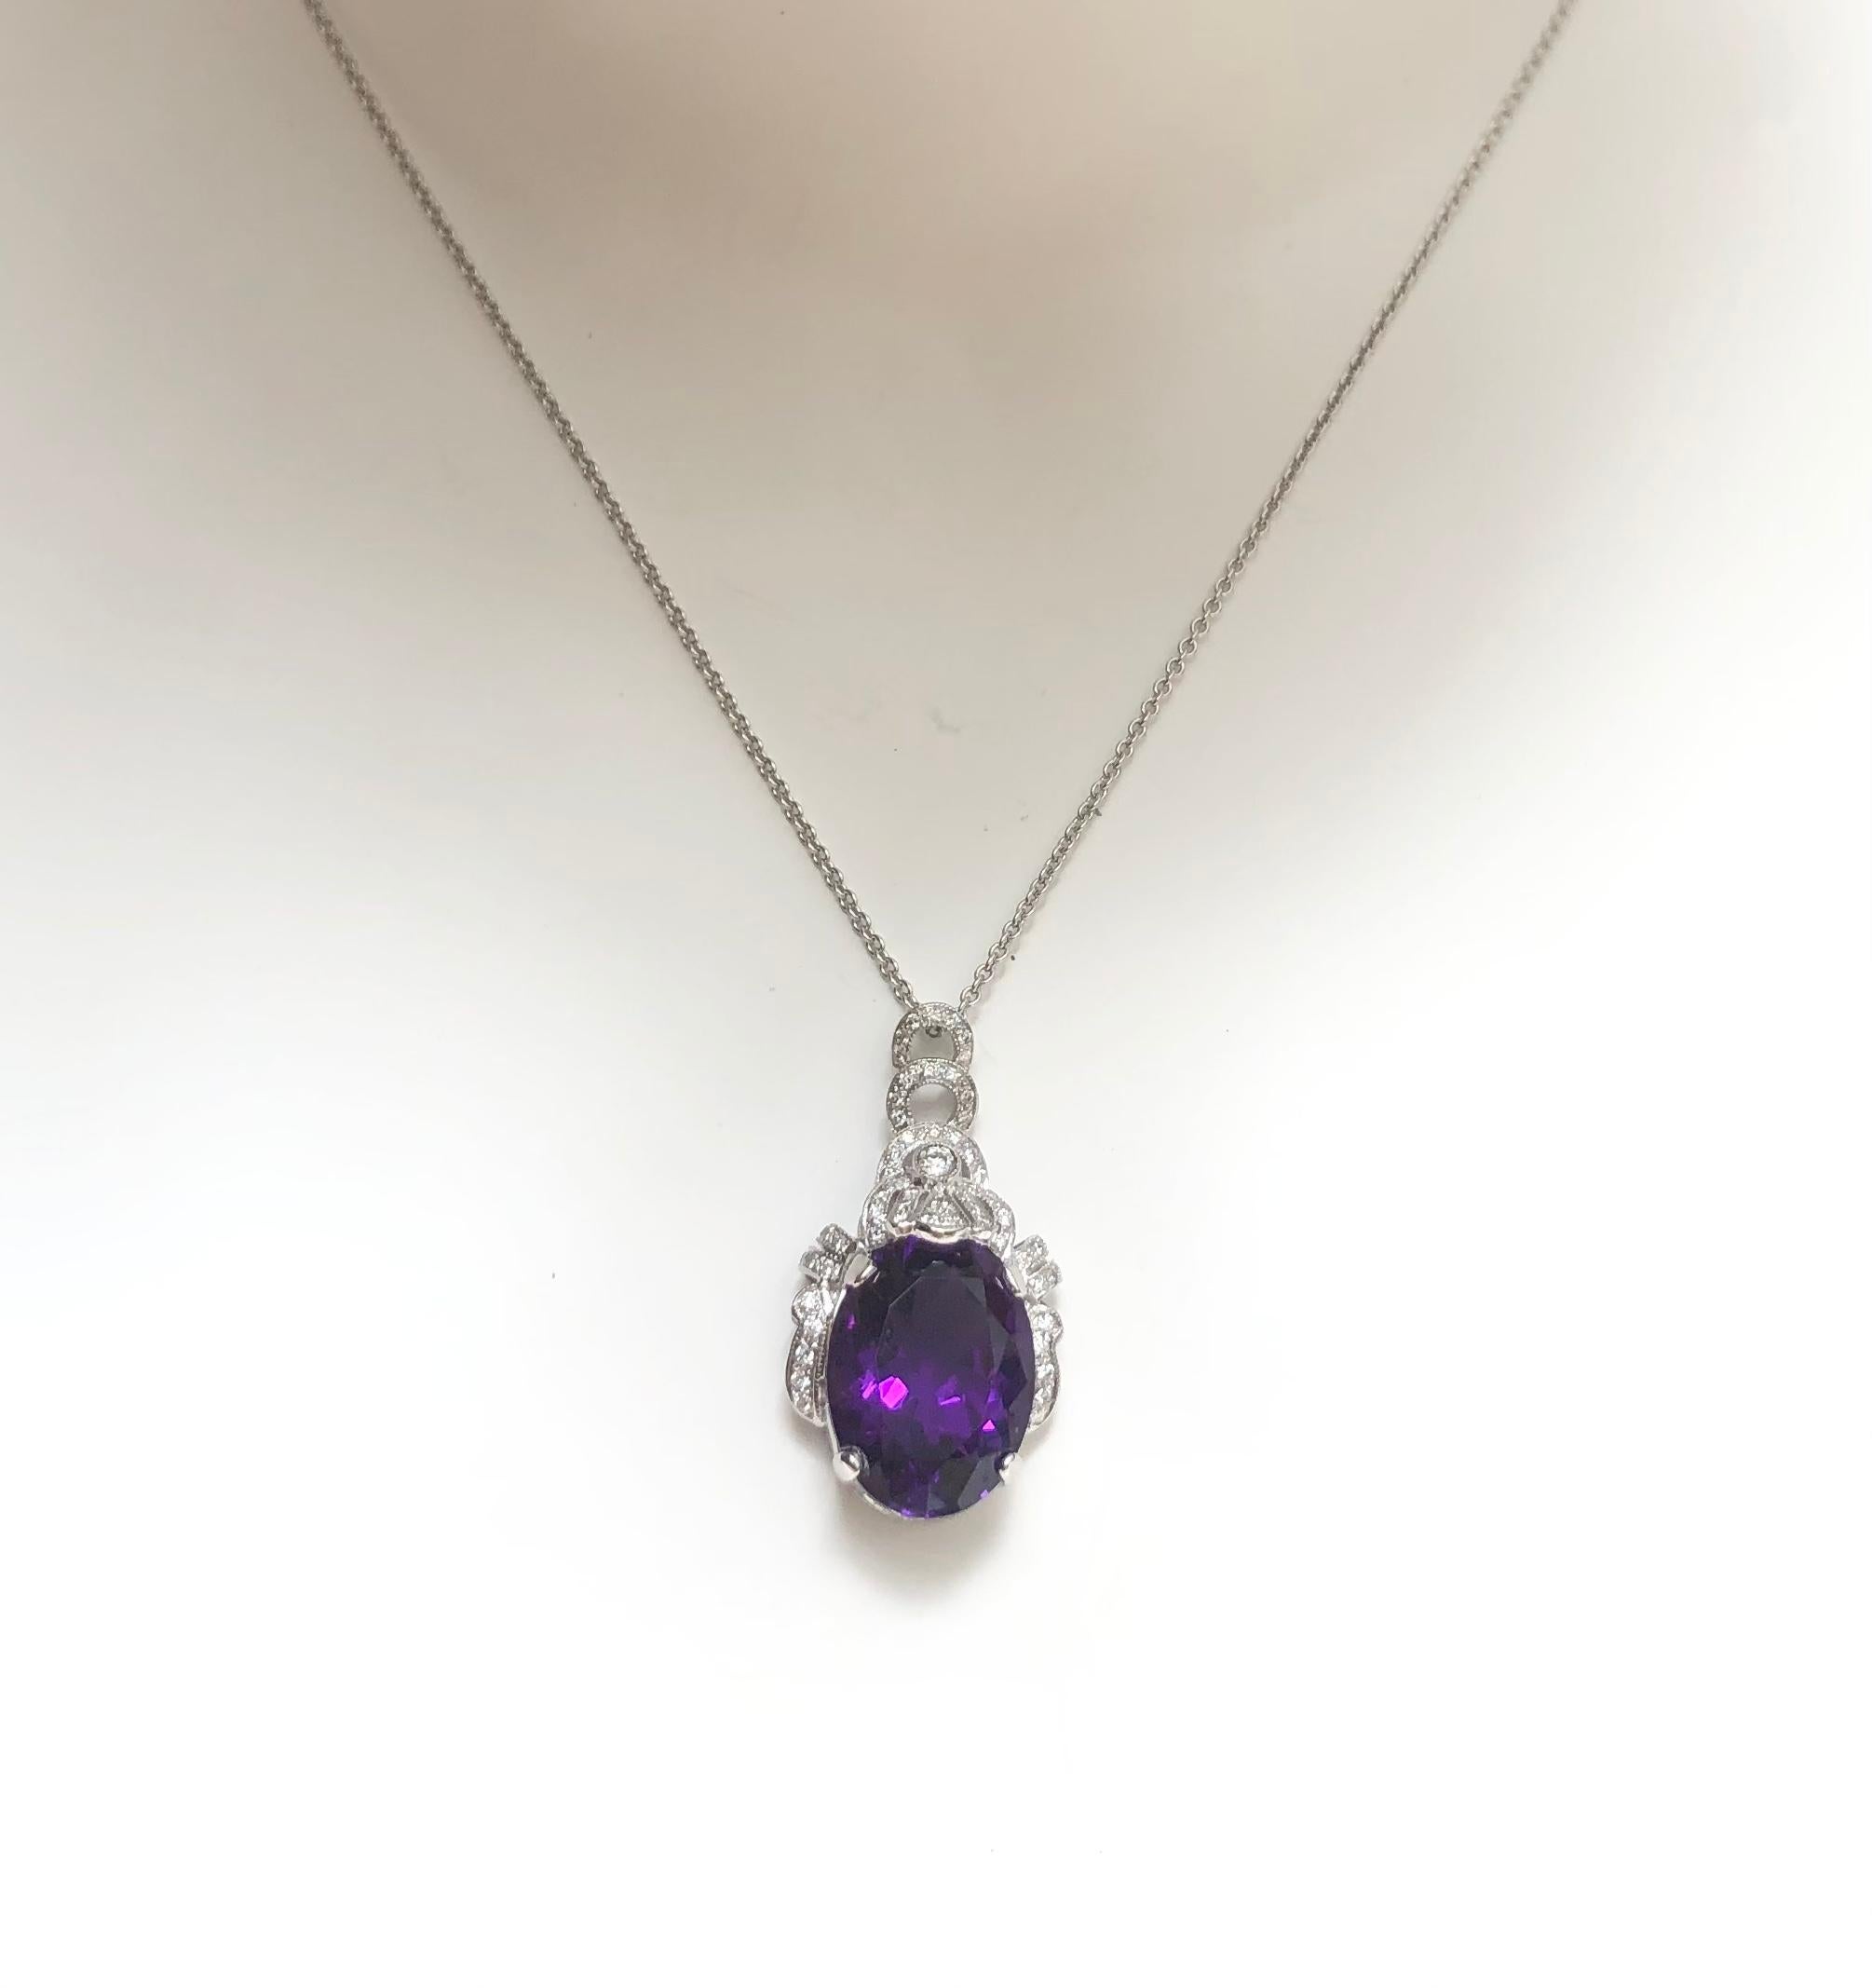 Amethyst 9.41 carats with Diamond 0.26 carat Pendant set in 18 Karat White Gold Settings
(chain not included)

Width:  1.1 cm 
Length: 3.0 cm
Total Weight: 6.35 grams

